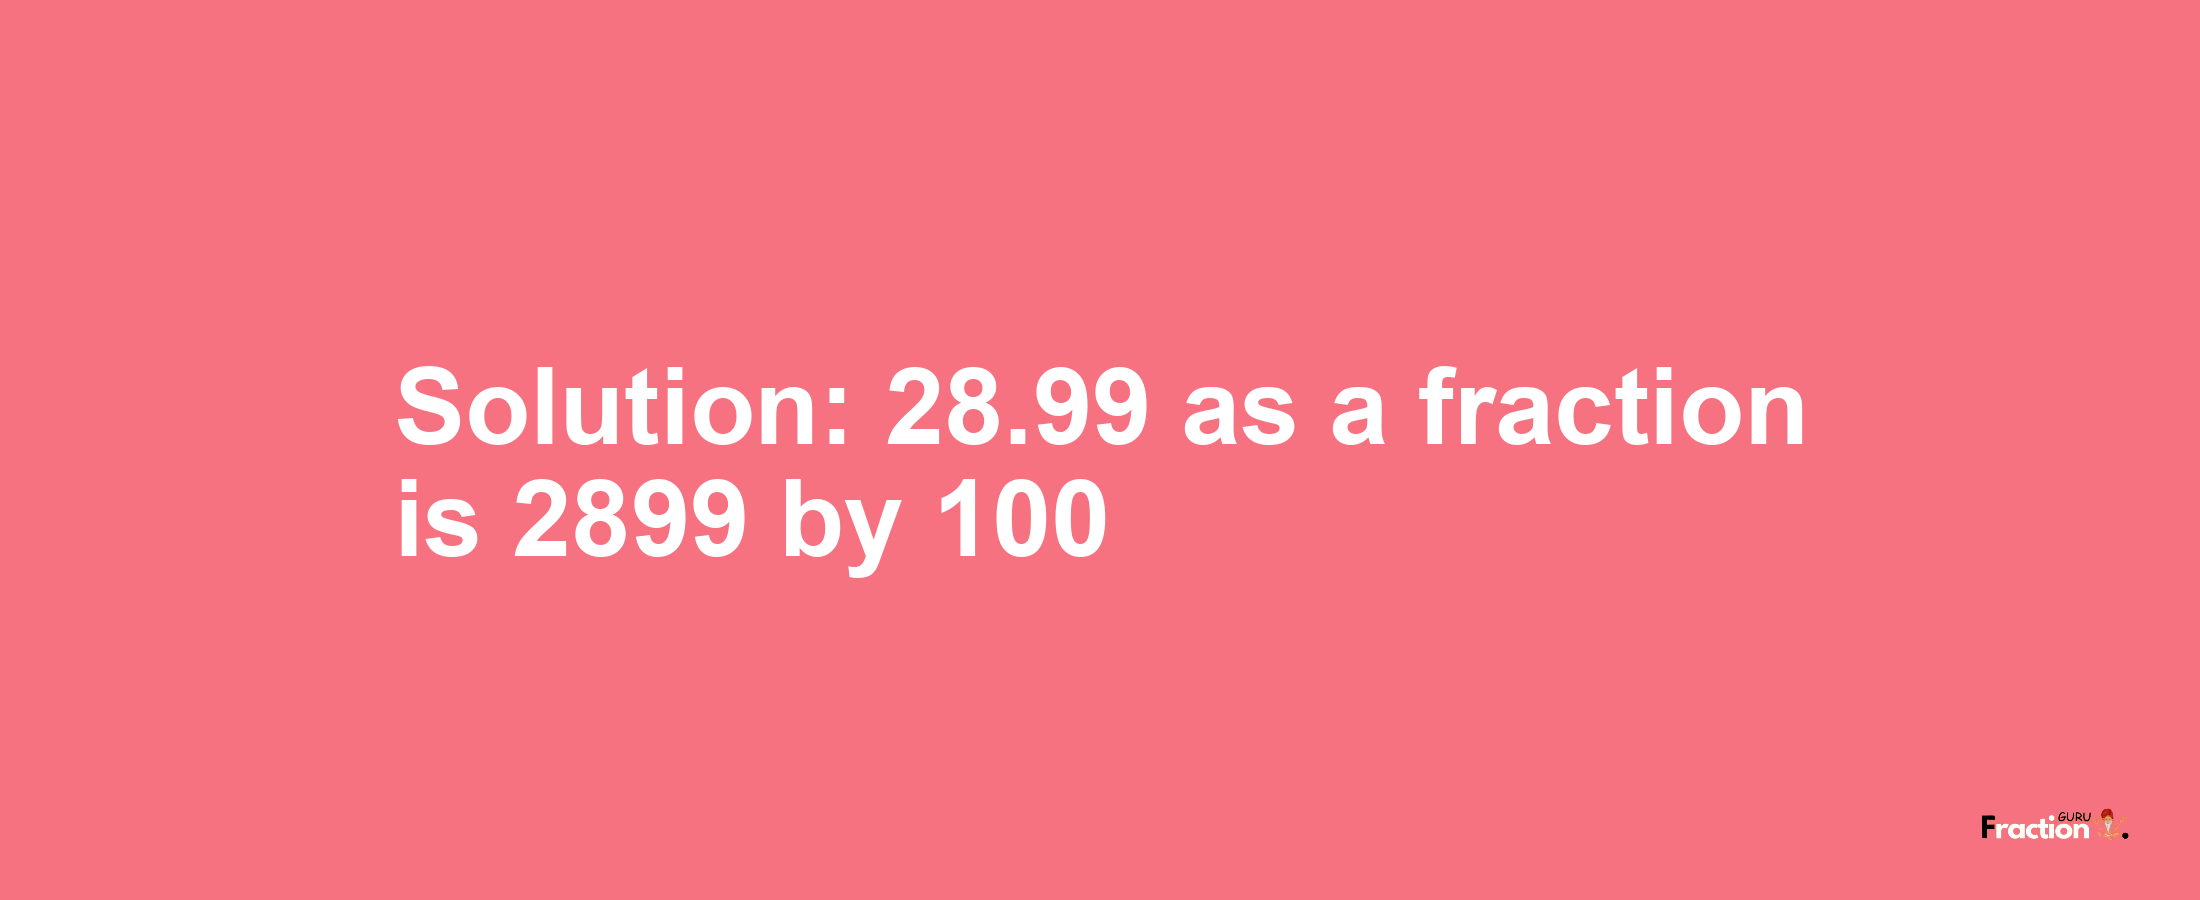 Solution:28.99 as a fraction is 2899/100